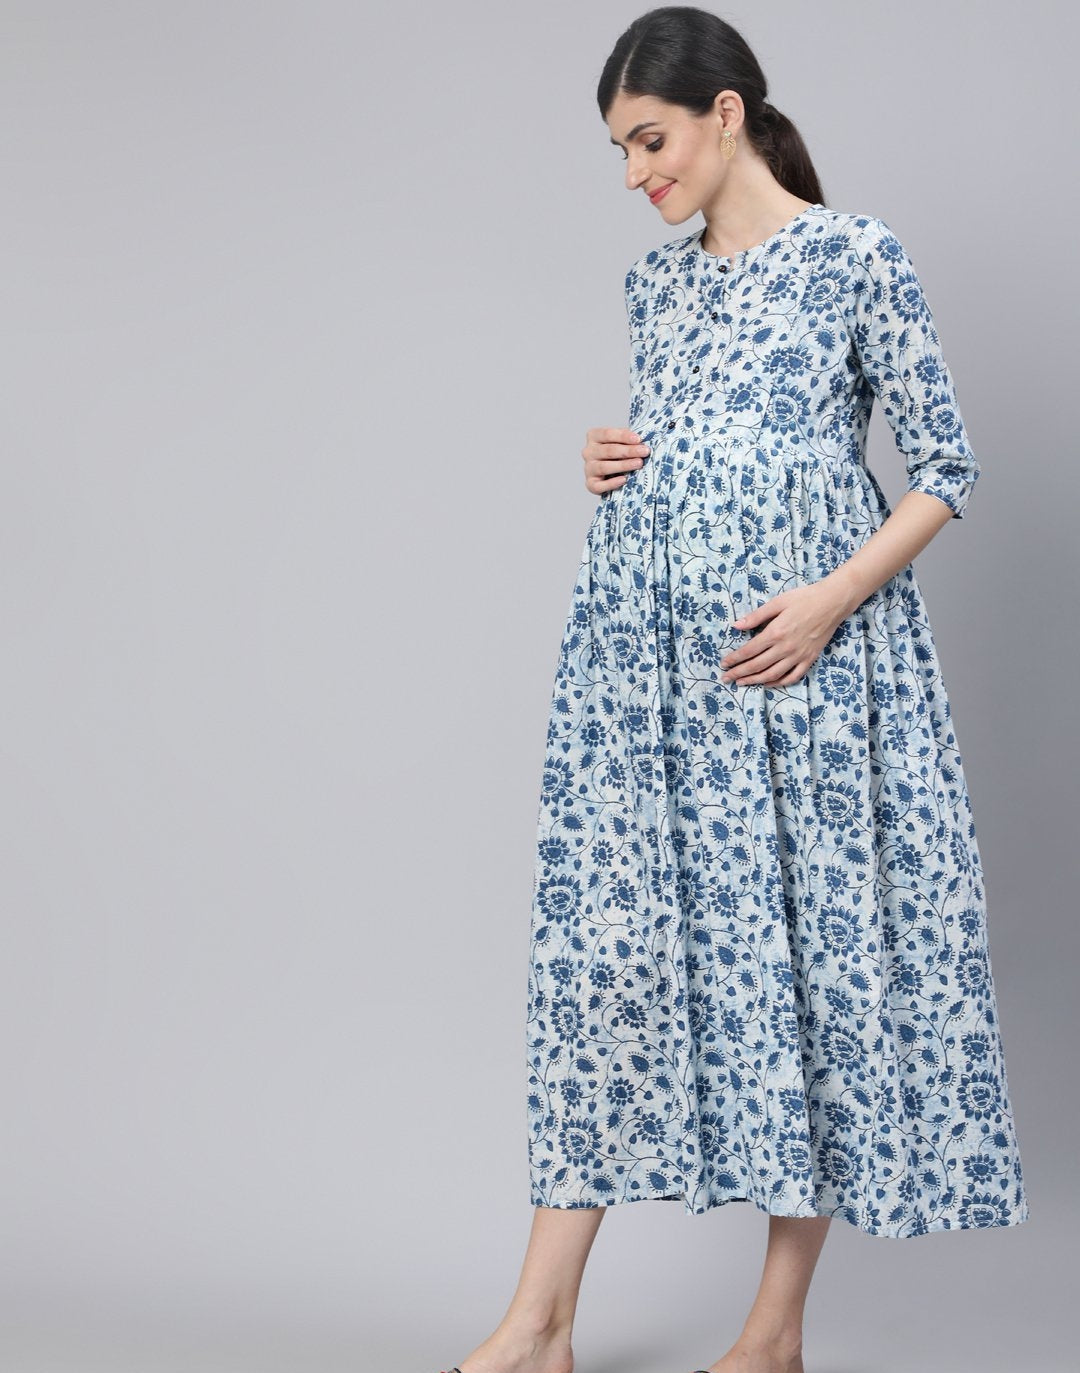 Women Off White & Blue Floral Printed Maternity Dress